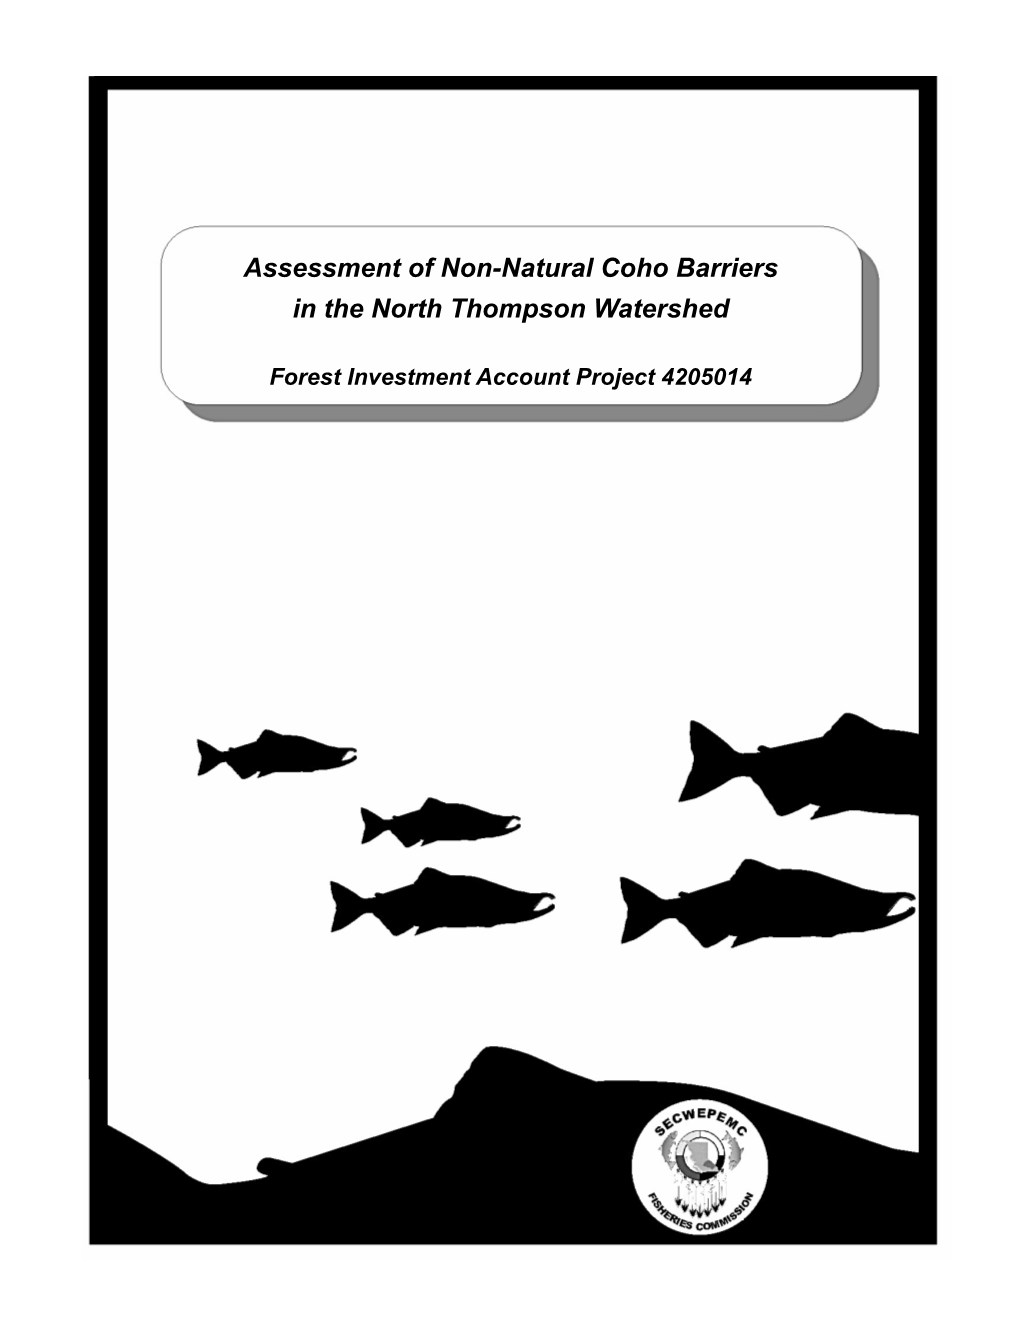 Assessment of Non-Natural Coho Barriers in the North Thompson Watershed